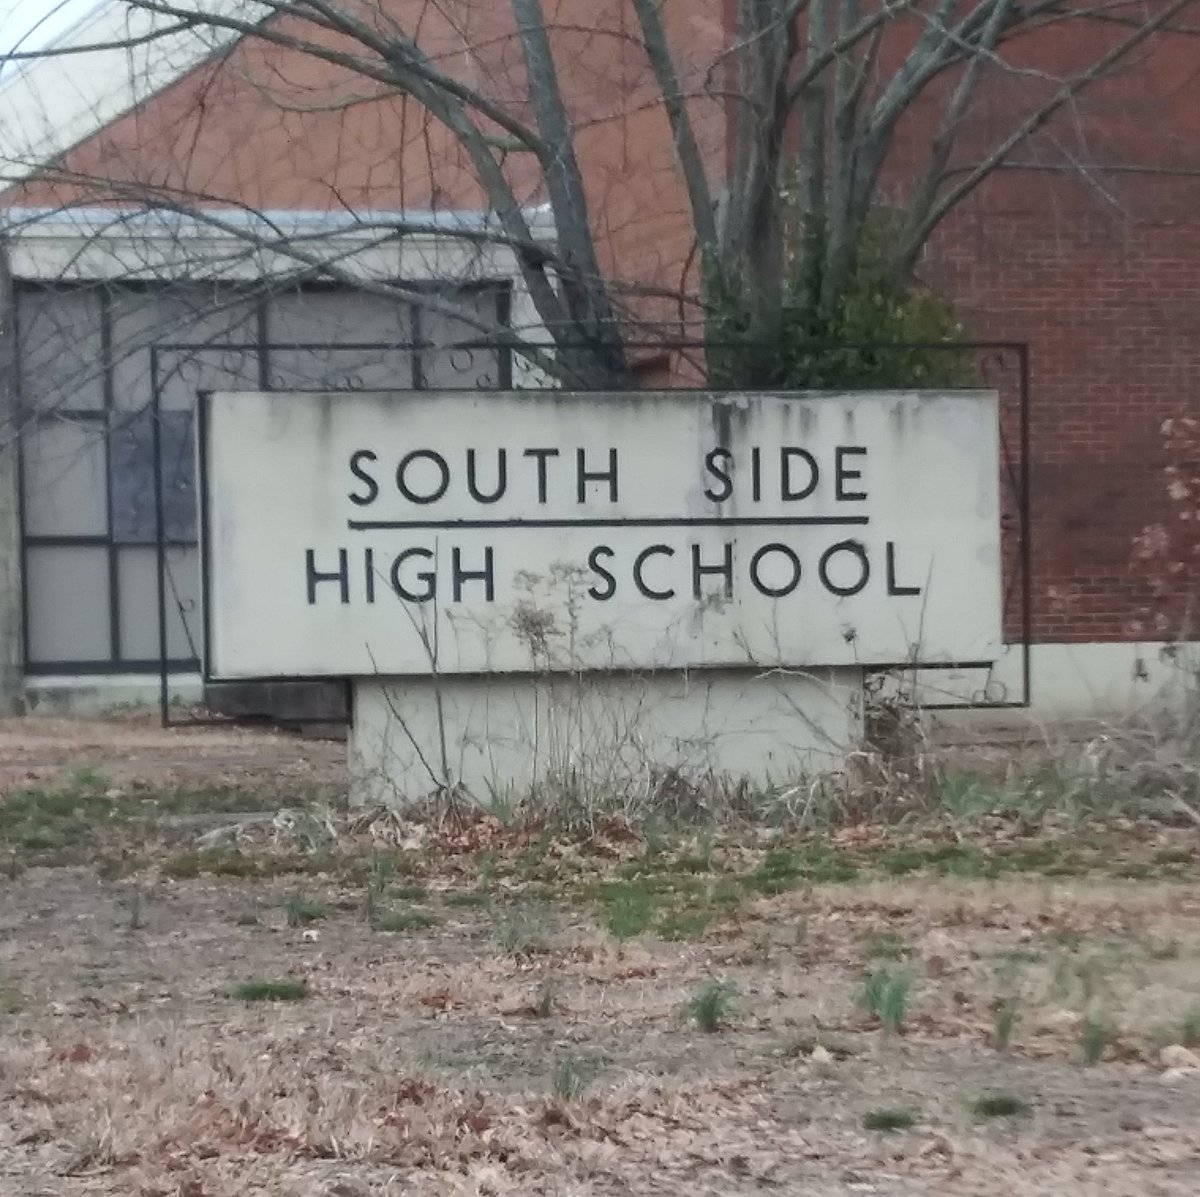 South Side High: If you grew up around Norris and Mallory you probably attended South Side. I used to visit my aunt who taught English there. They were known as The Scrappers and the mascot was a bulldog. It's closed now but the memories live on.